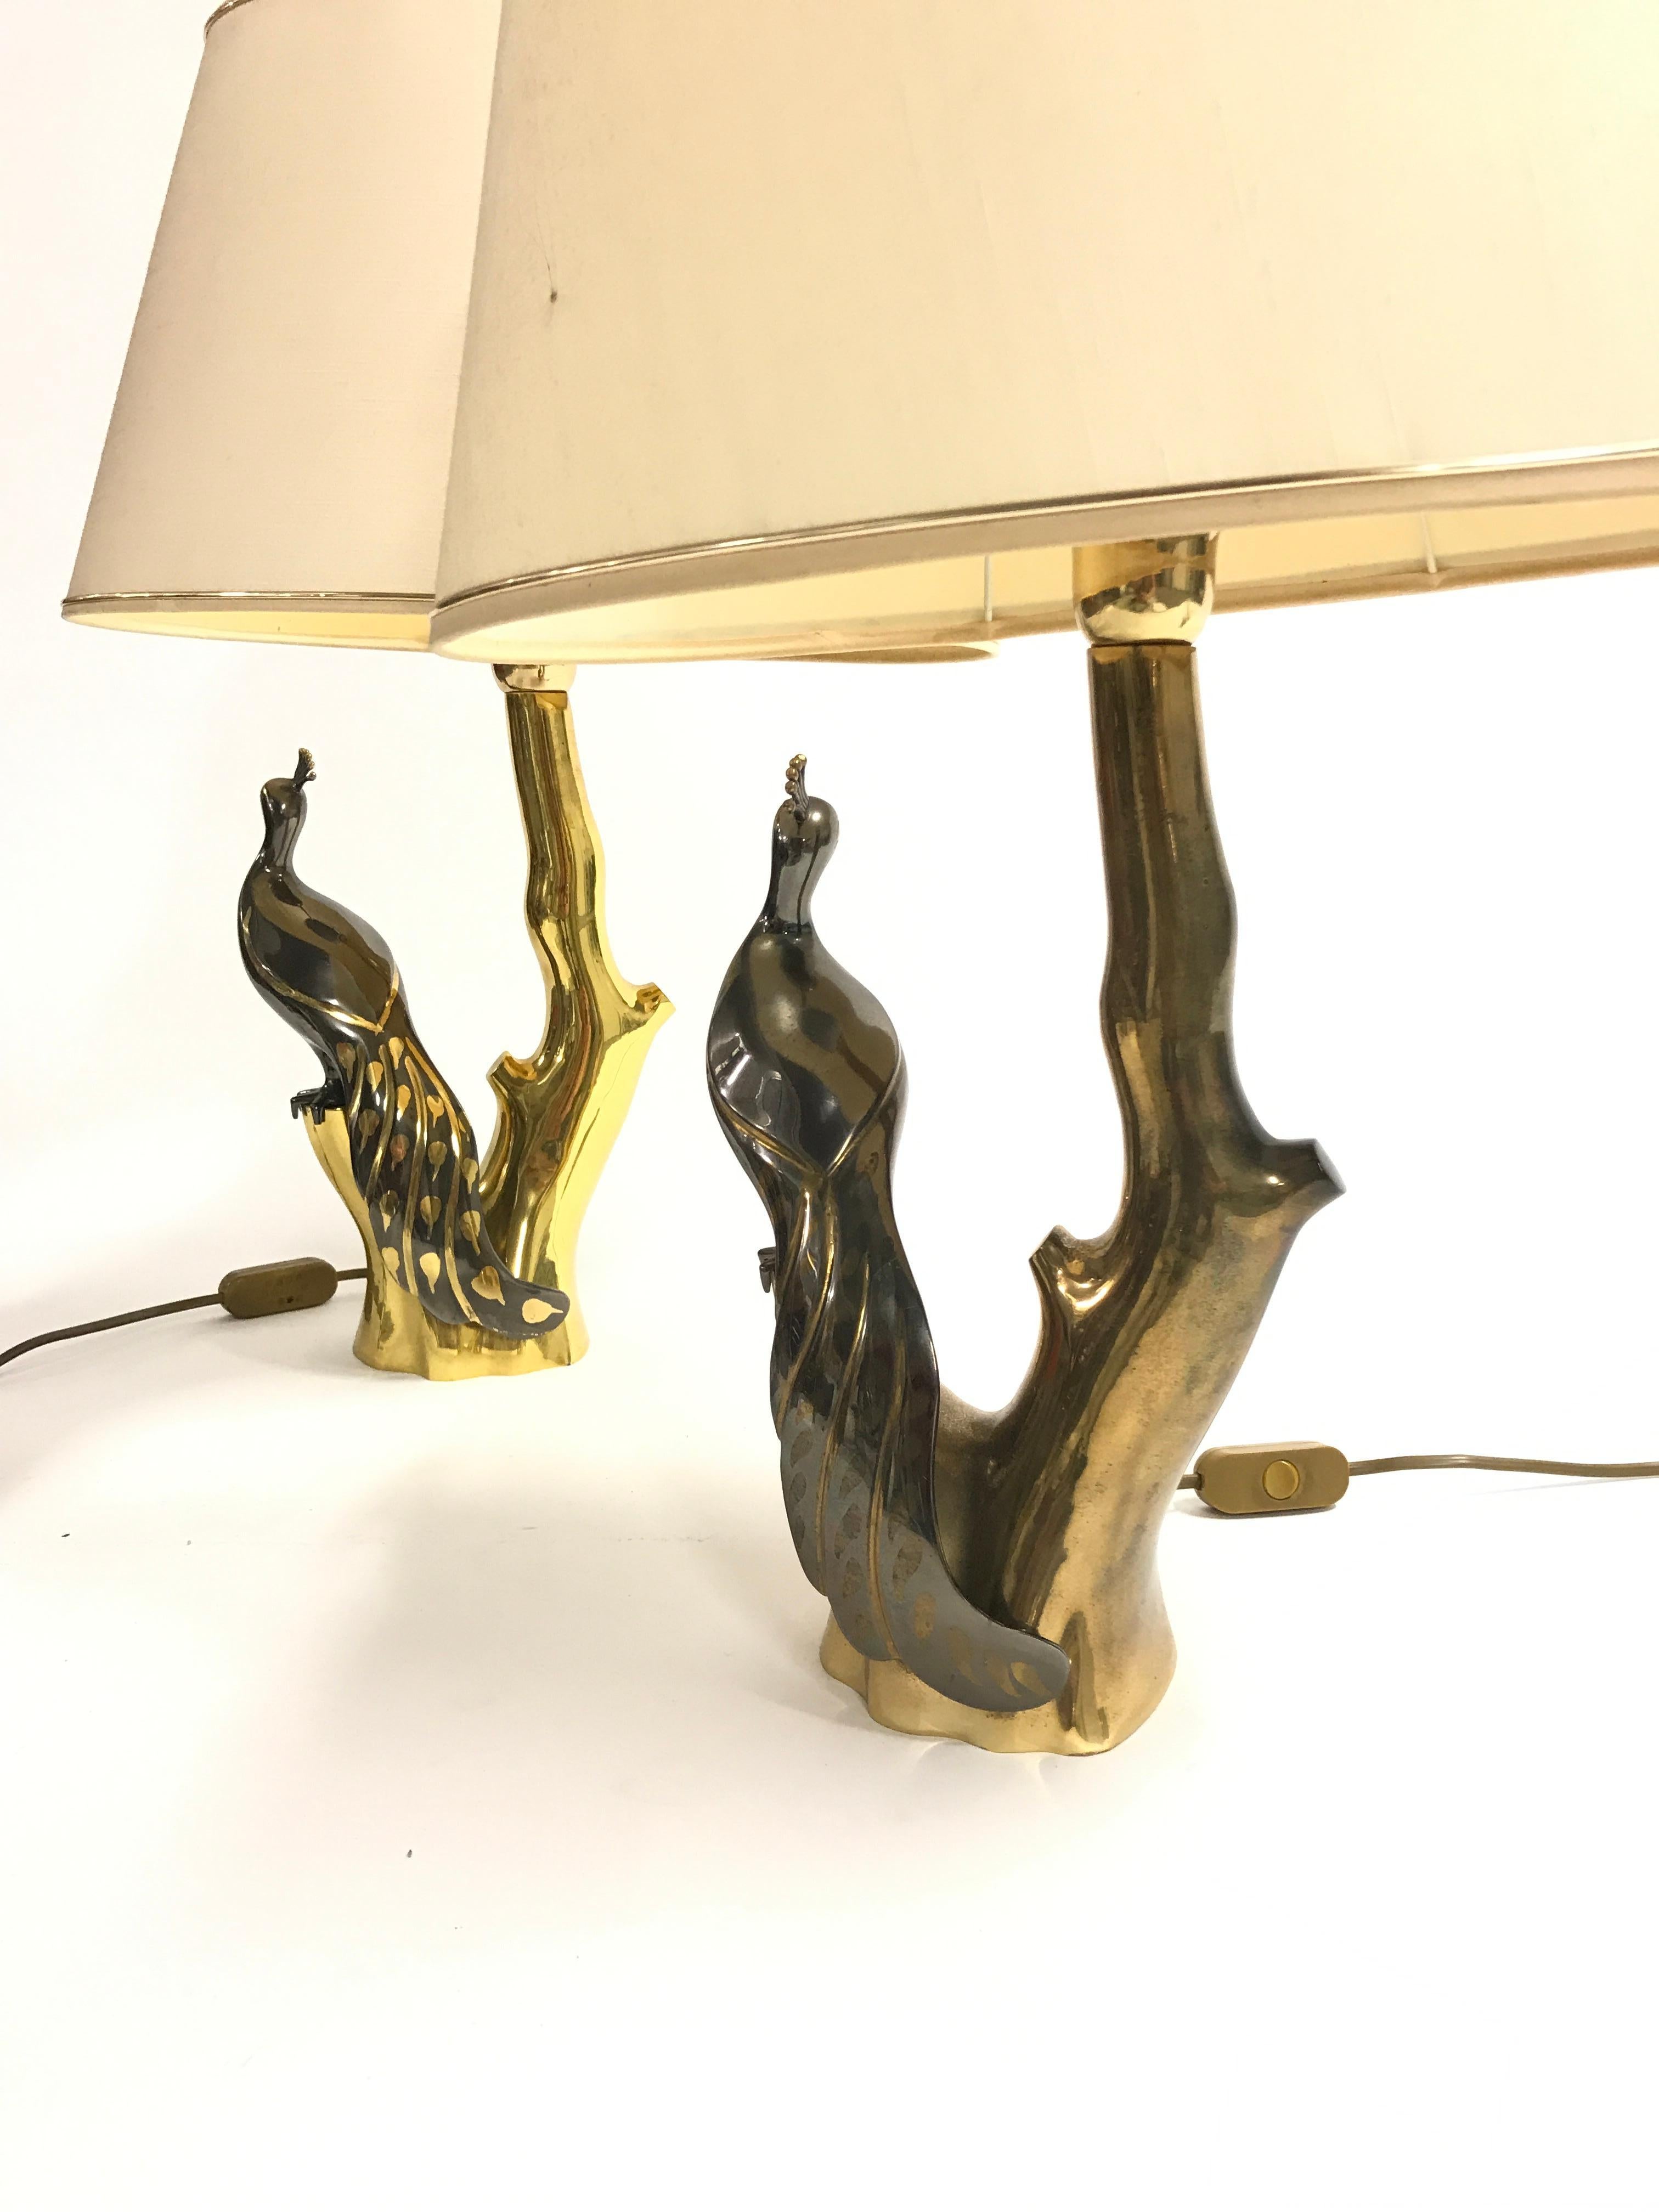 Pair of vintage brass table lamps depicting peacocks sitting on a branch.

The lamps where designed by Willy Daro.

Good condition, tested and ready for use with a regular E26/E27 light bulb.

Both lamps come with their original and good